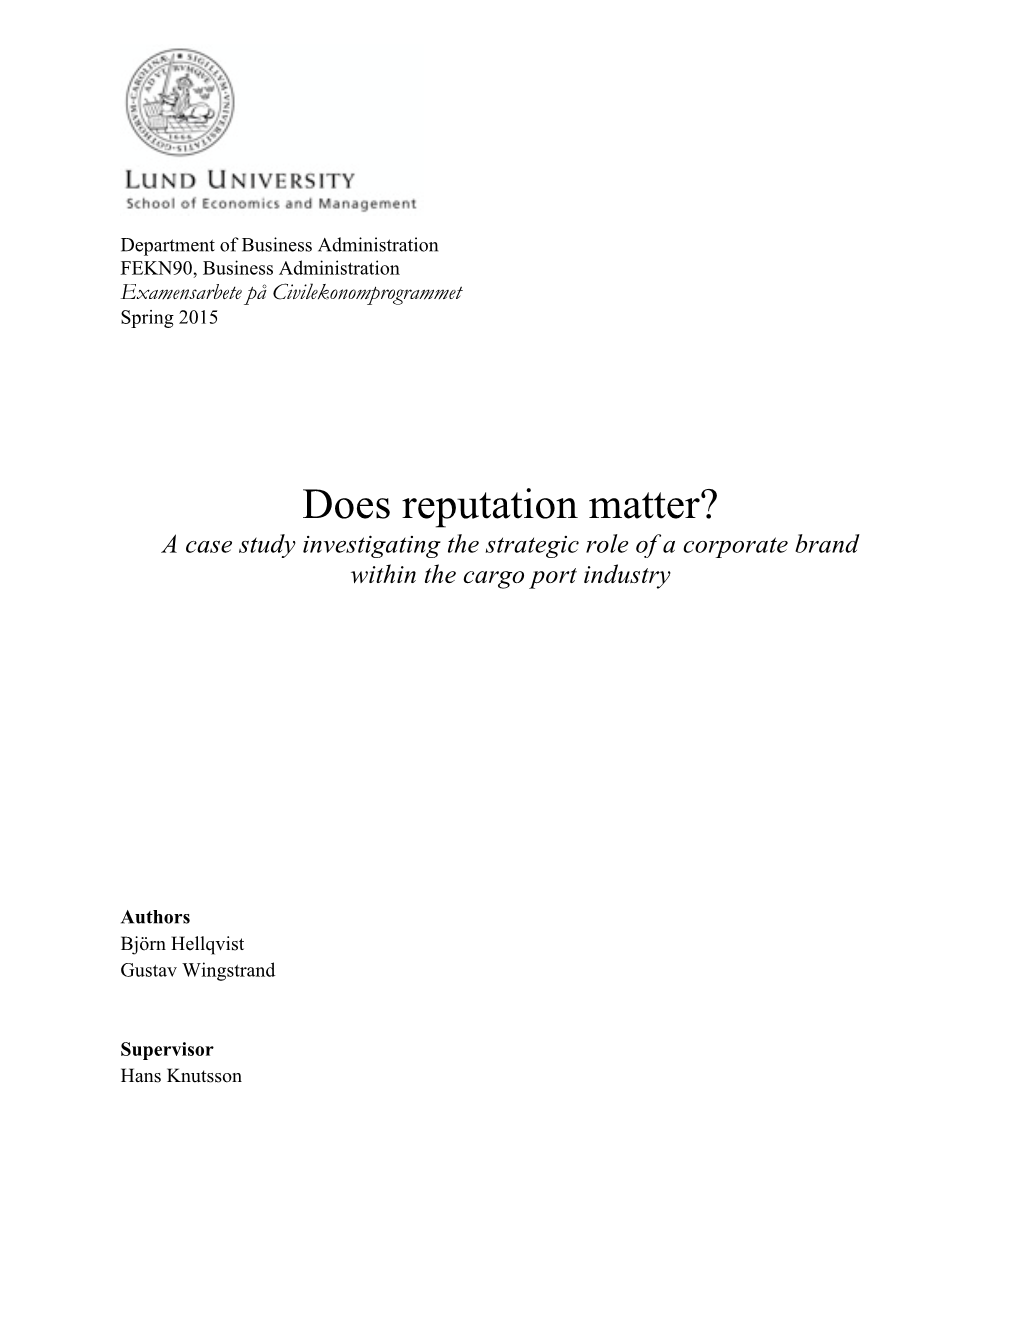 Does Reputation Matter? a Case Study Investigating the Strategic Role of a Corporate Brand Within the Cargo Port Industry